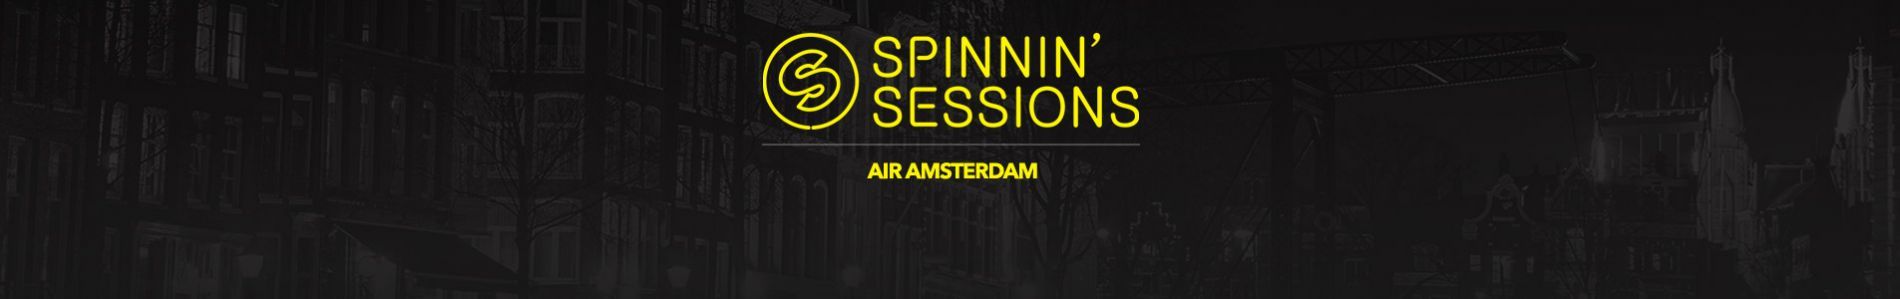 Spinnin' Sessions ADE 2016 - Spinnin' Sessions